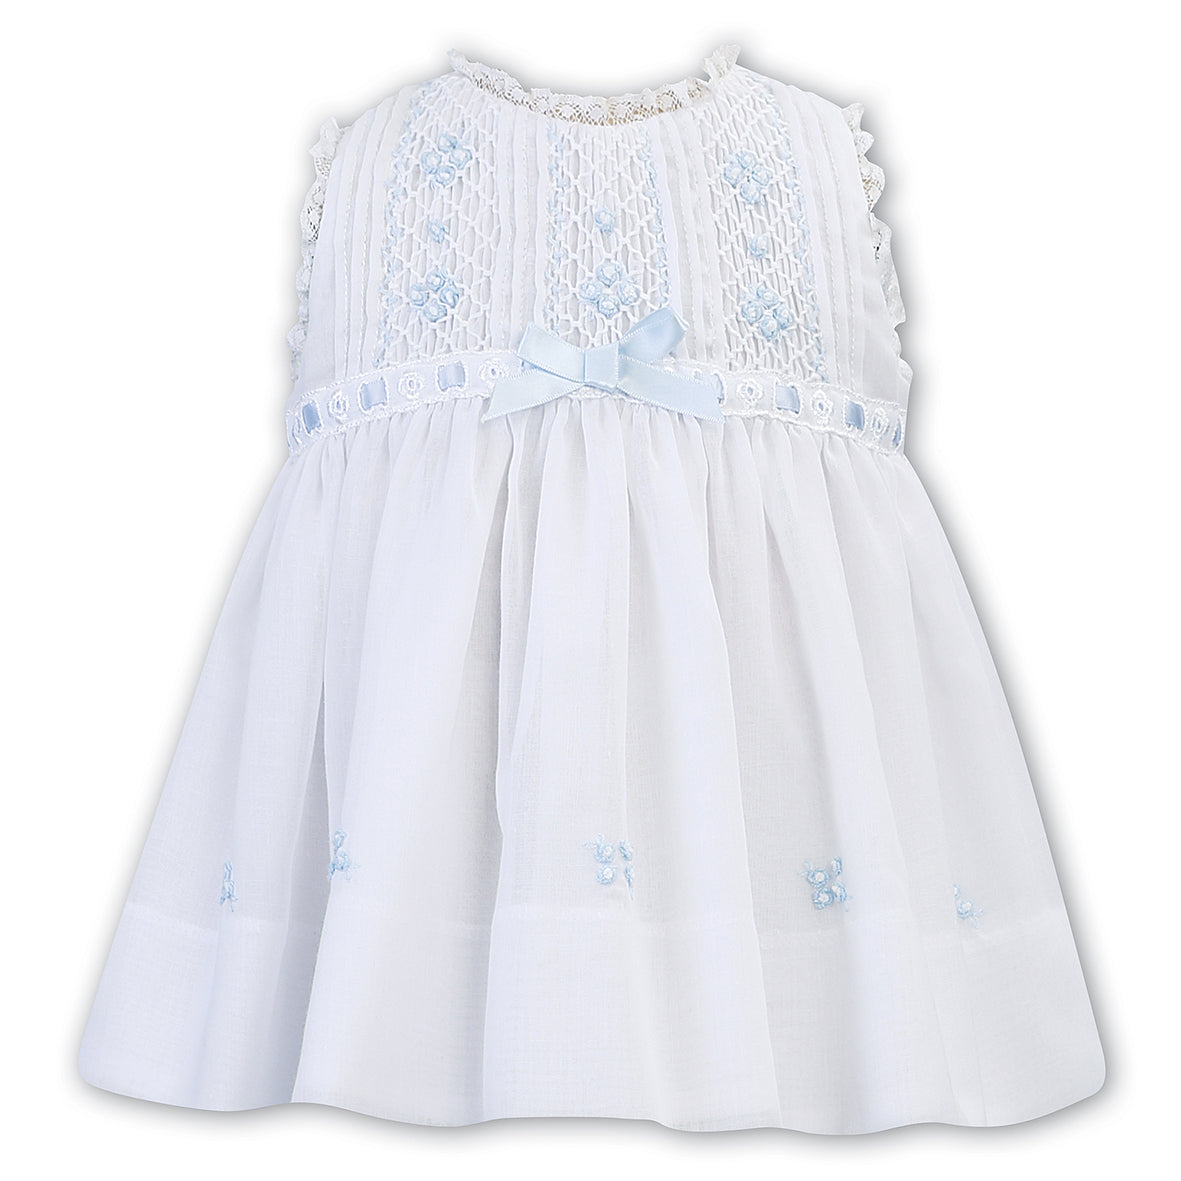 Sarah Louise - Hand smocked sun dress, white with pale blue detail 012245-2 | Betty McKenzie